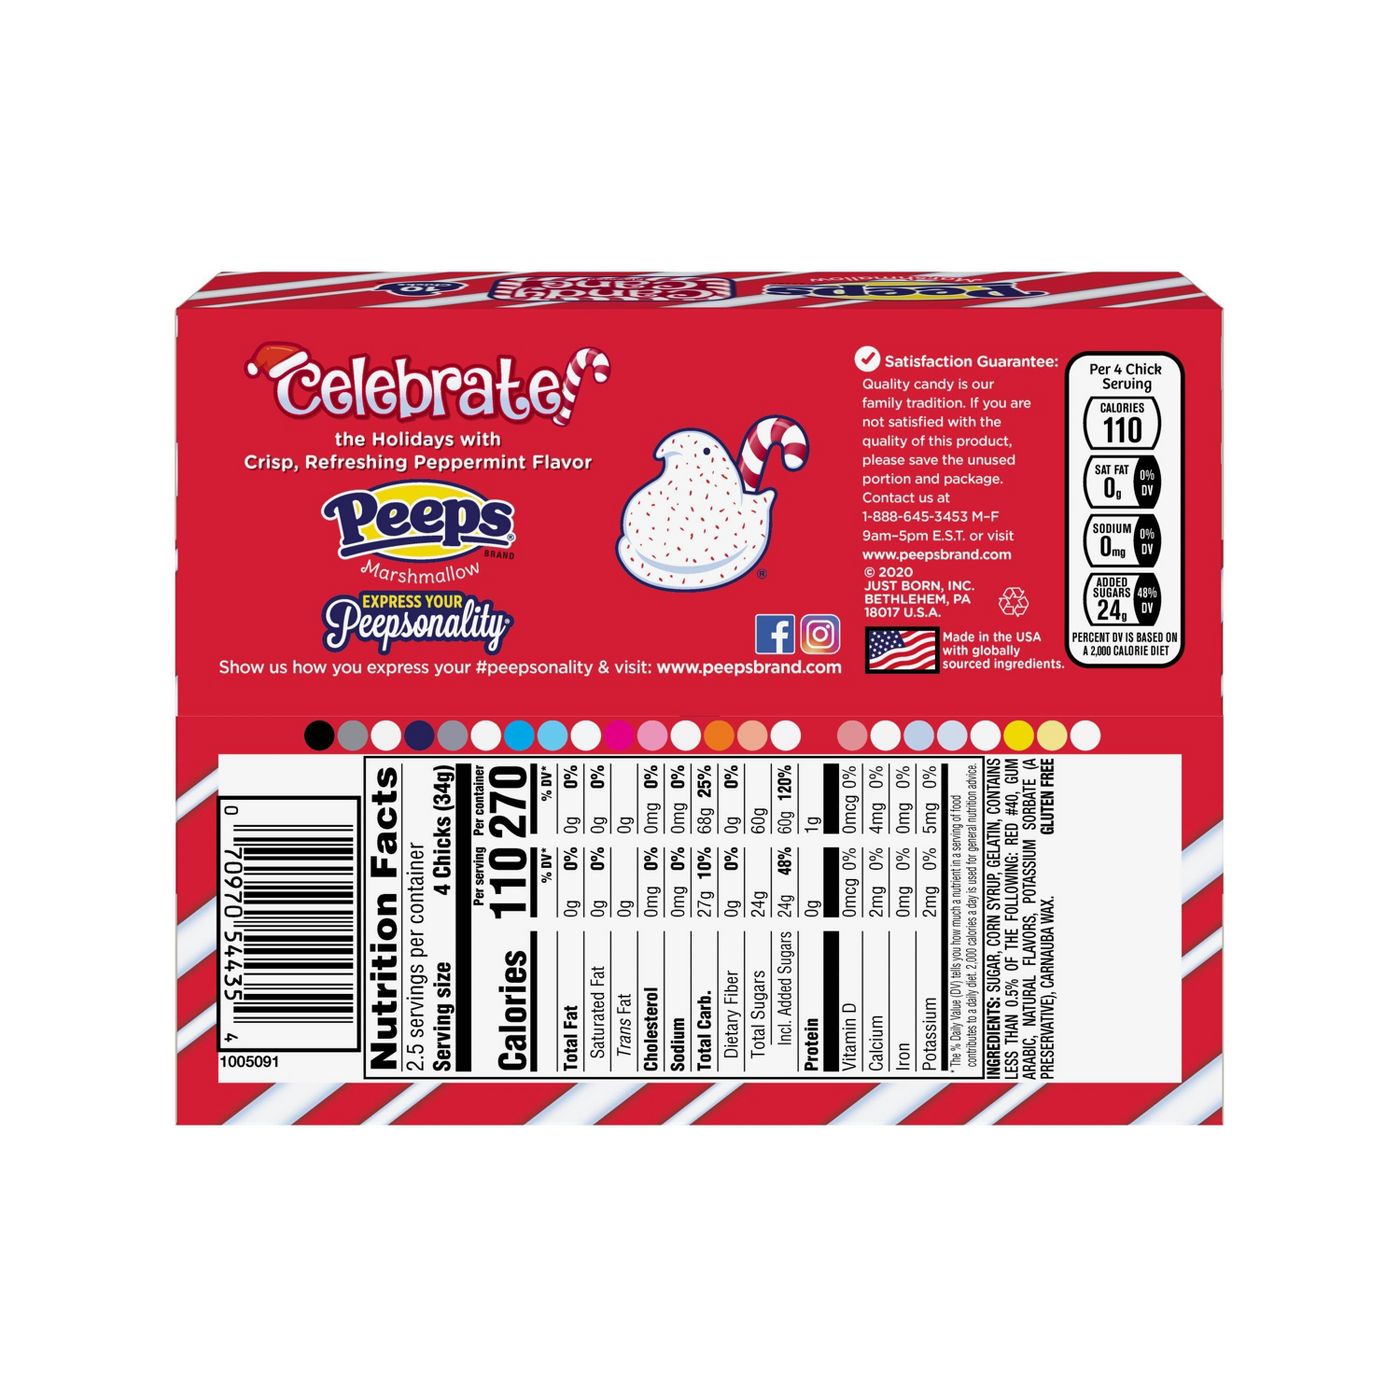 Peeps Candy Cane Flavored Marshmallow Chicks, 10 Count, 3oz